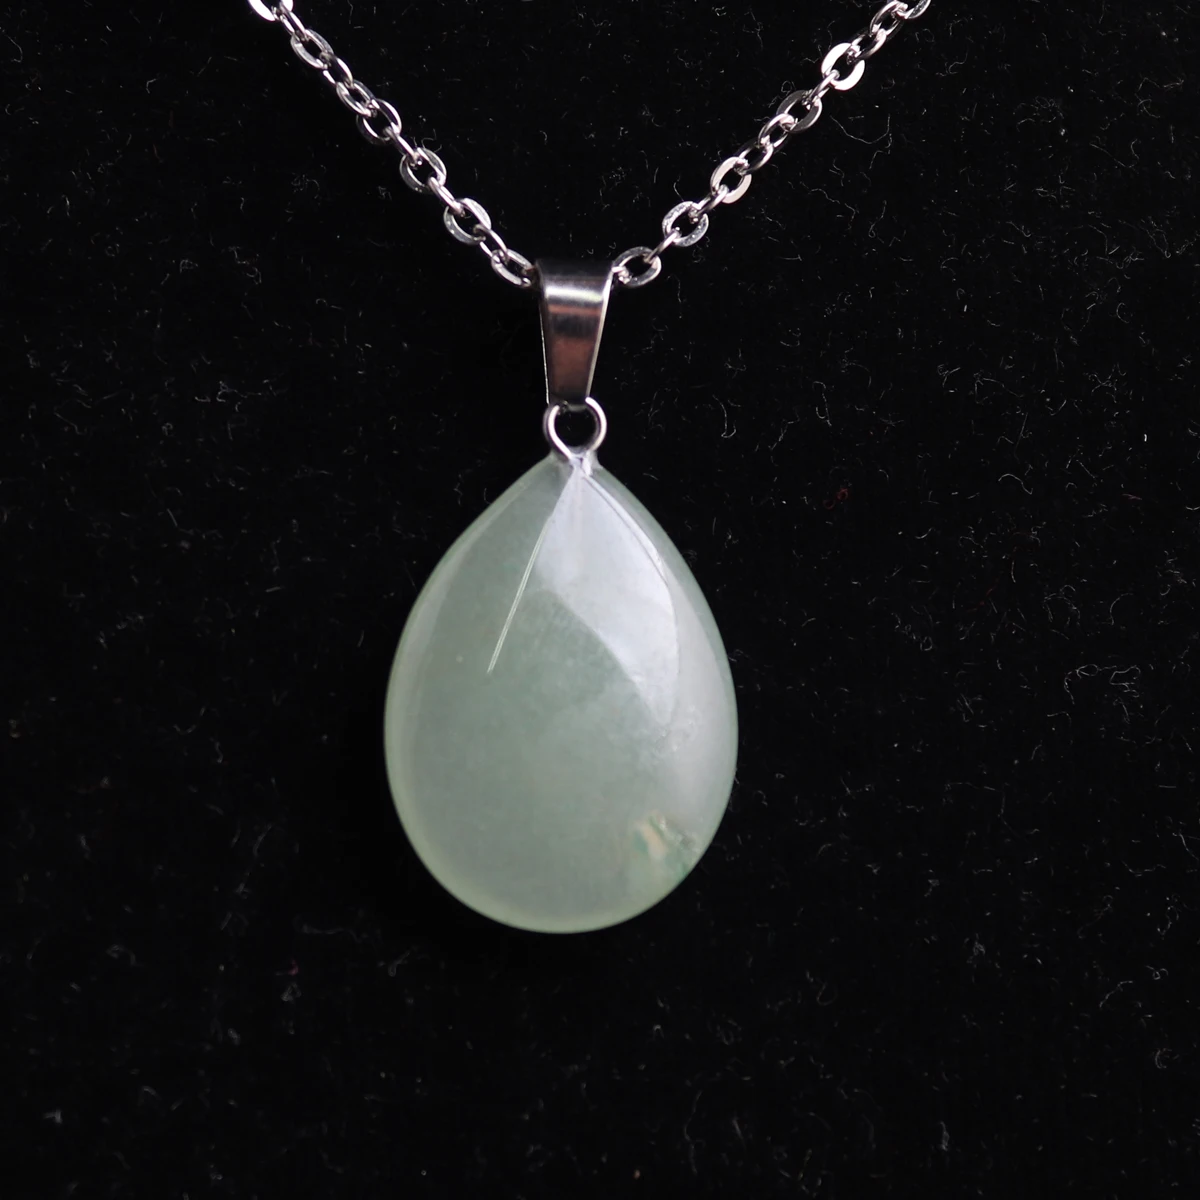 1PCS  Water Drop Natural Stone Pendant Necklace Crystal Aventurine Stainless Steel Chain Charm Healing Jewelry